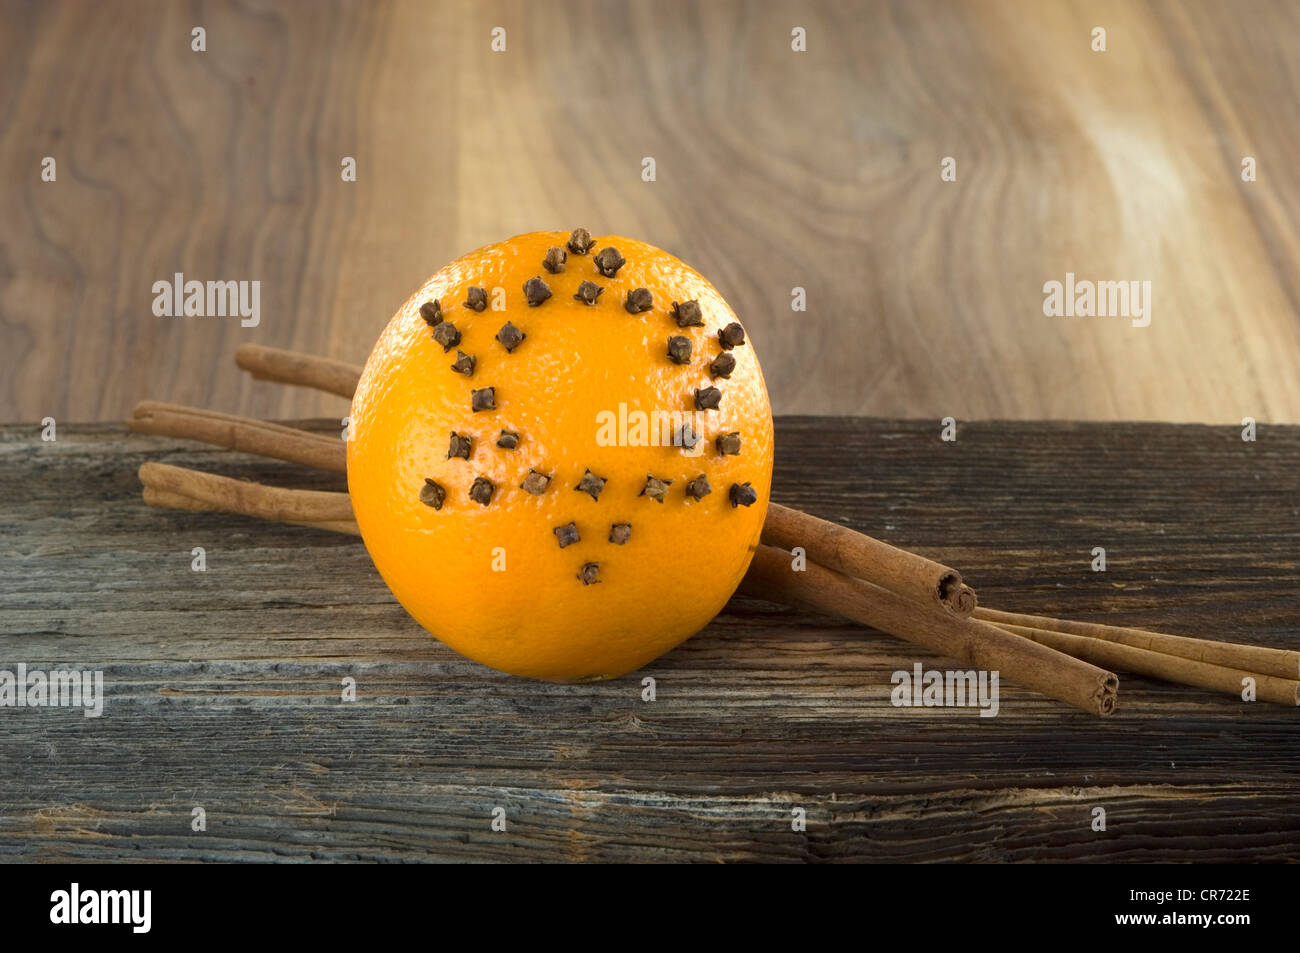 Orange studded with cloves and cinnamon stick on table, close up Stock Photo